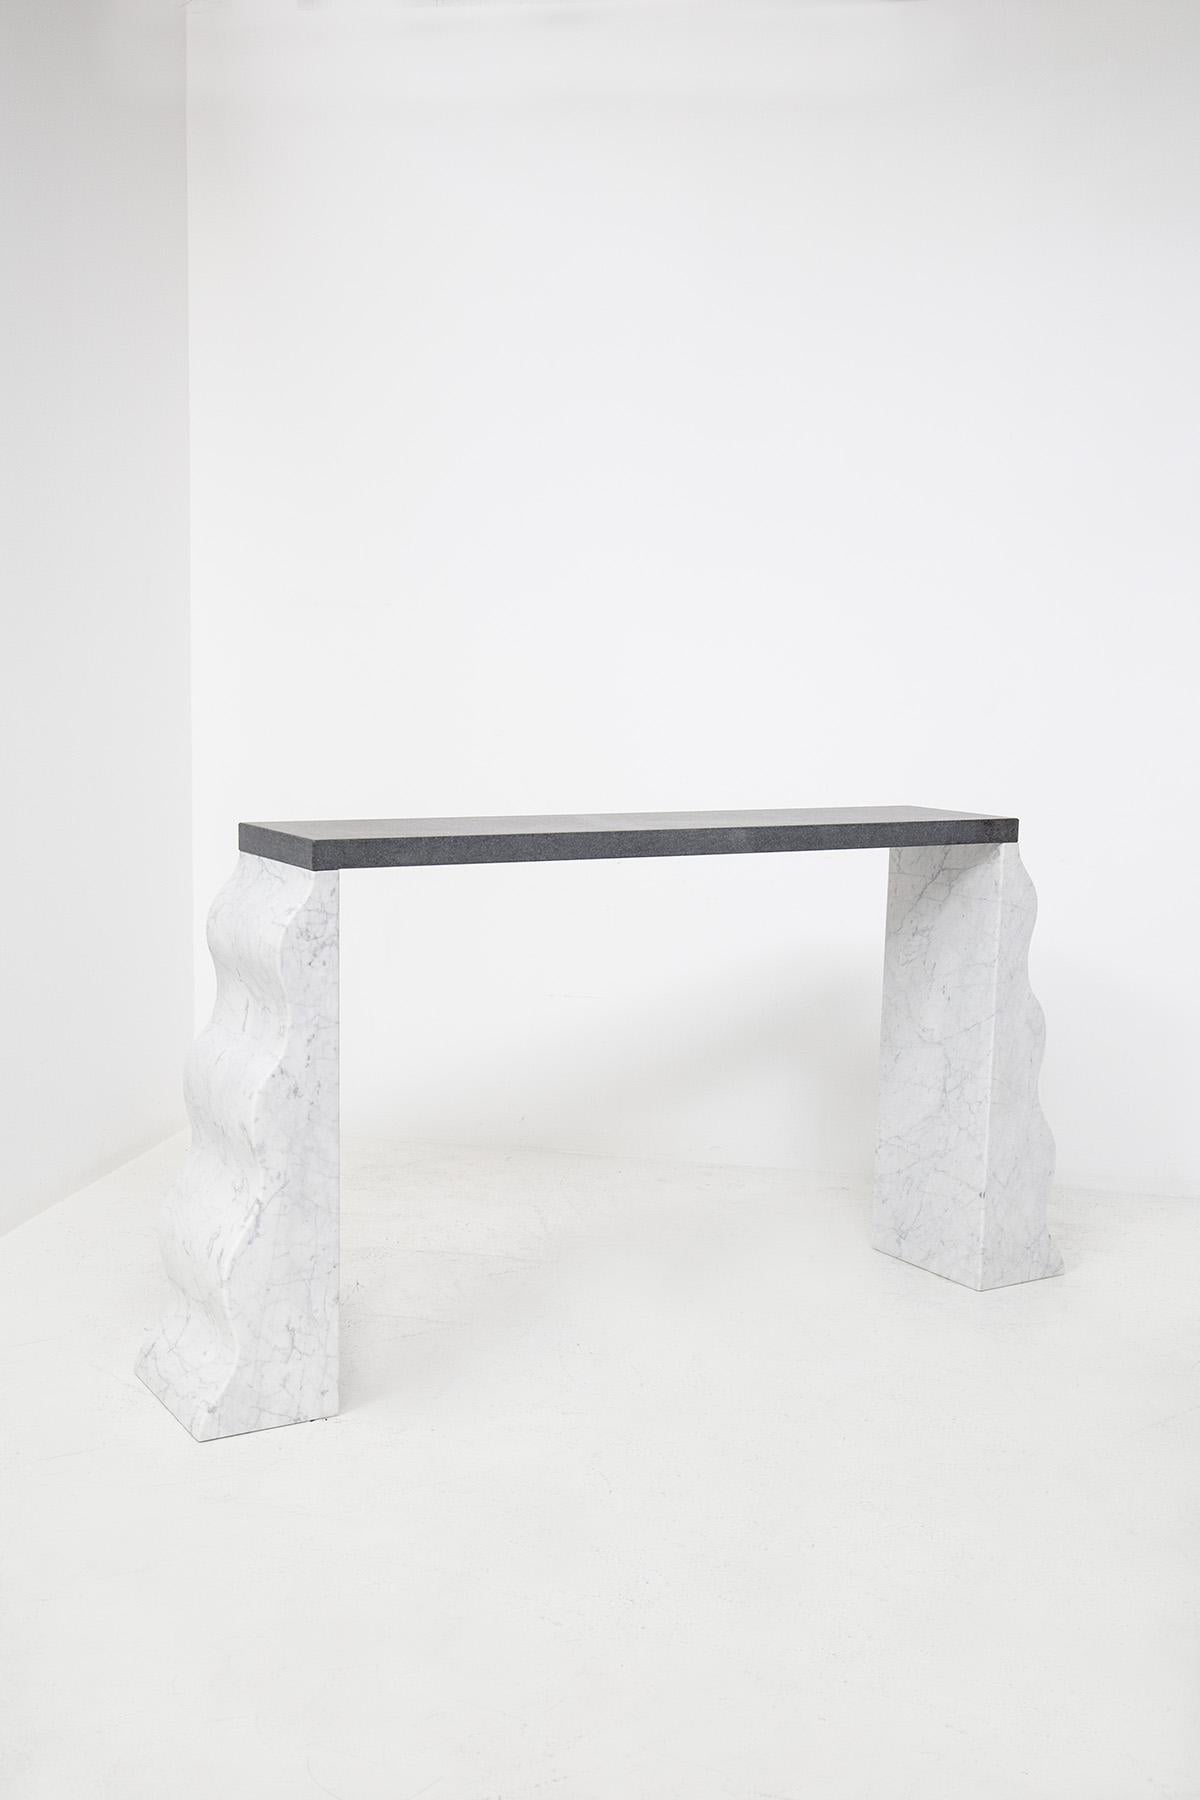 Mid-Century Modern Ettore Sottsass Consolle in White and Black Marble Montenegro